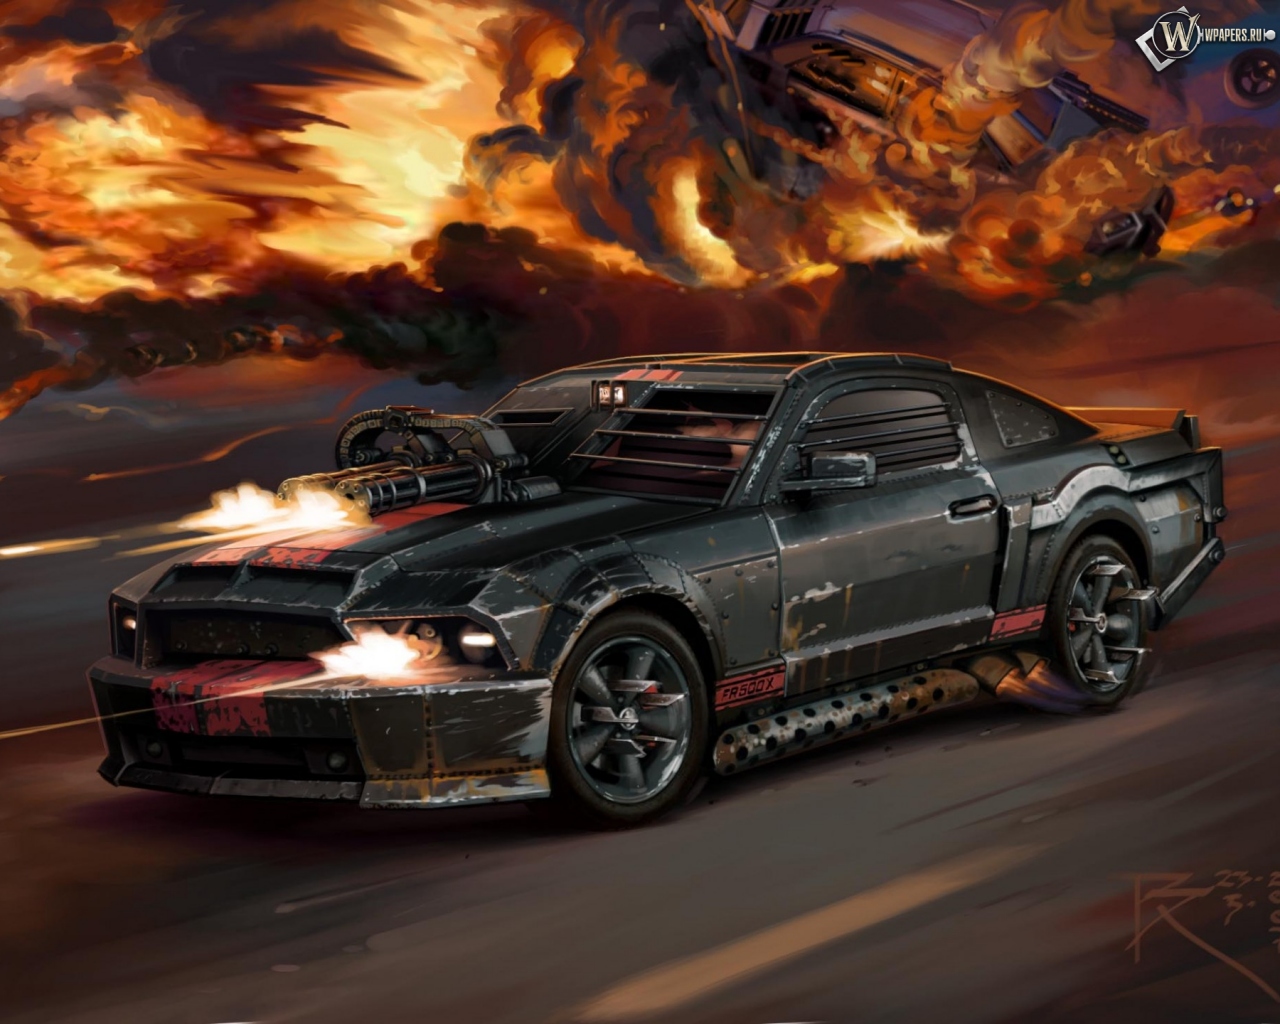 Car ford mustang death race 1280x1024